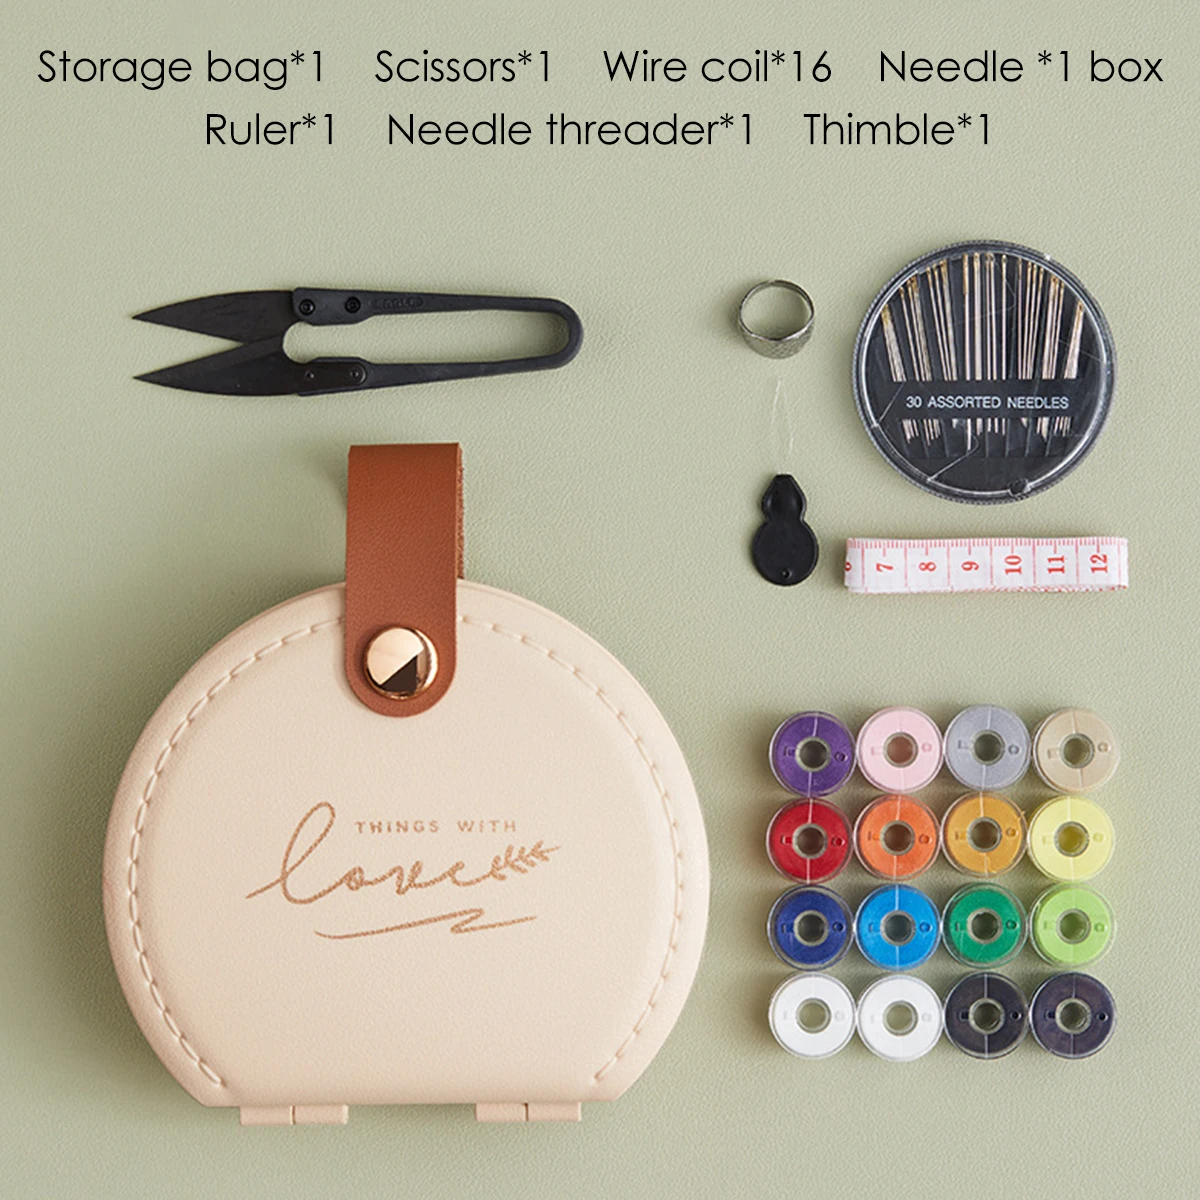 

22Pcs Needle and Thread Box Set Portable Hand Sewing Supplies Double Layer Large Capacity Thread Roll Storage Bag with Scissors